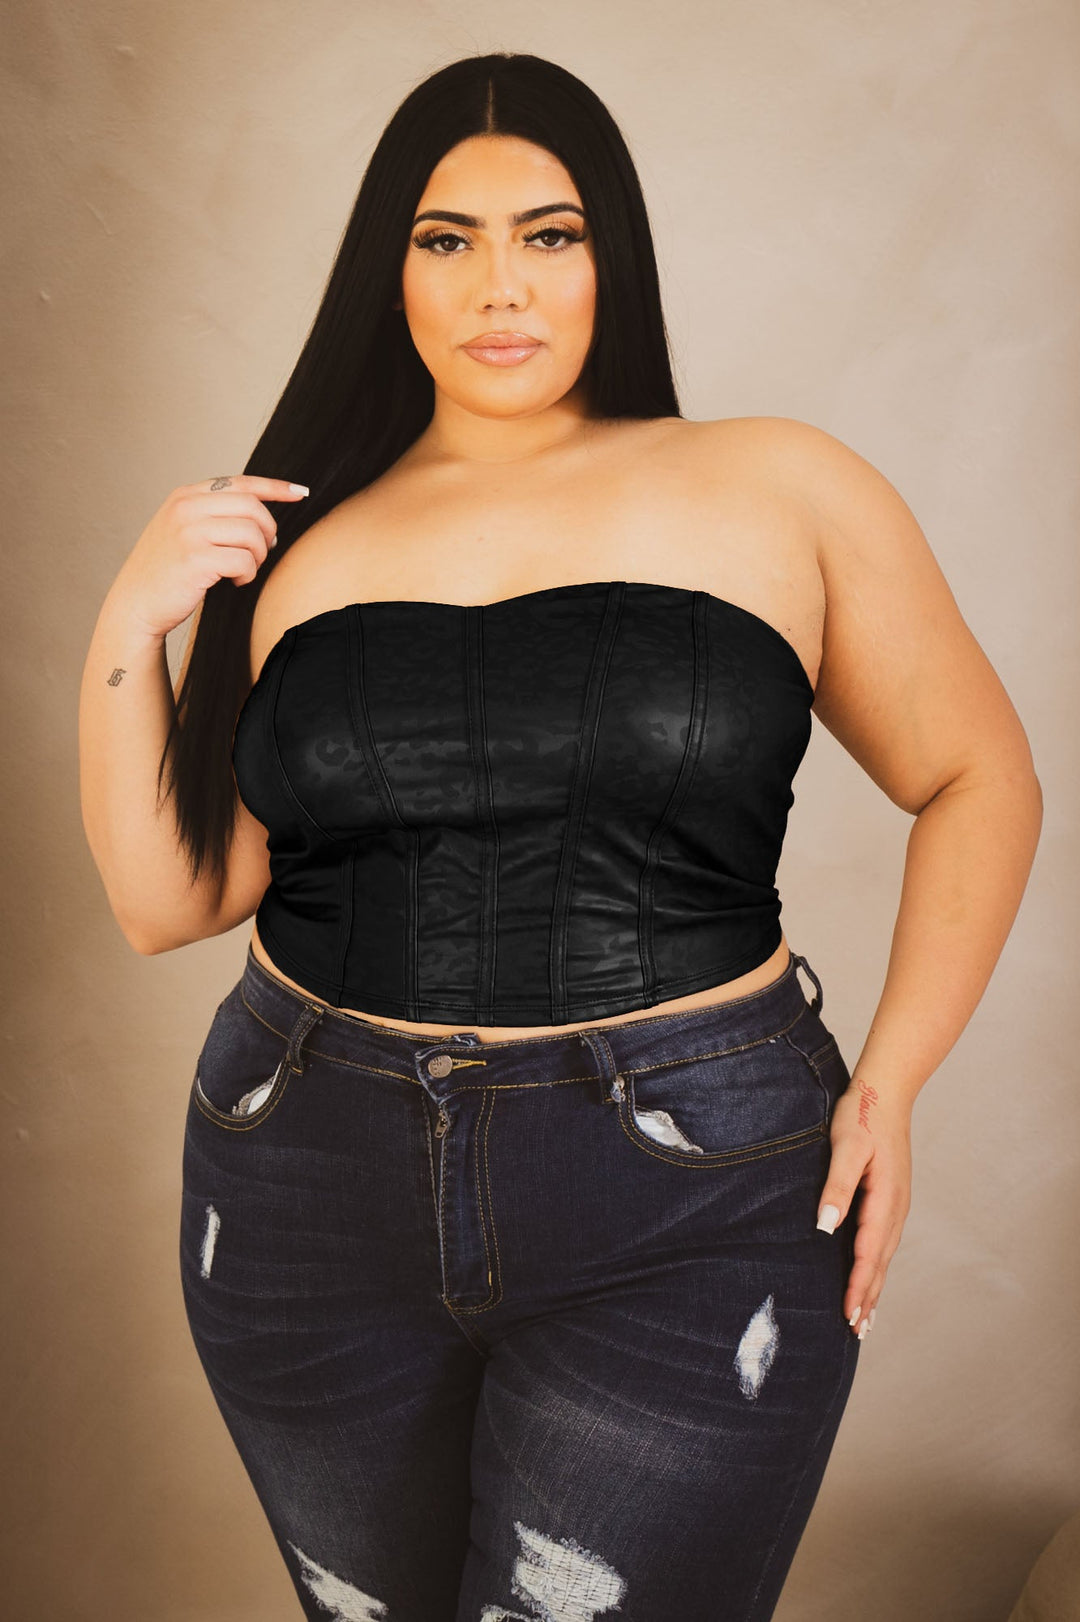 Curvy Sense on X: We know yall chilling at home, but do in faux leather  catsuit. #curvysense #curvysensedoll  / X